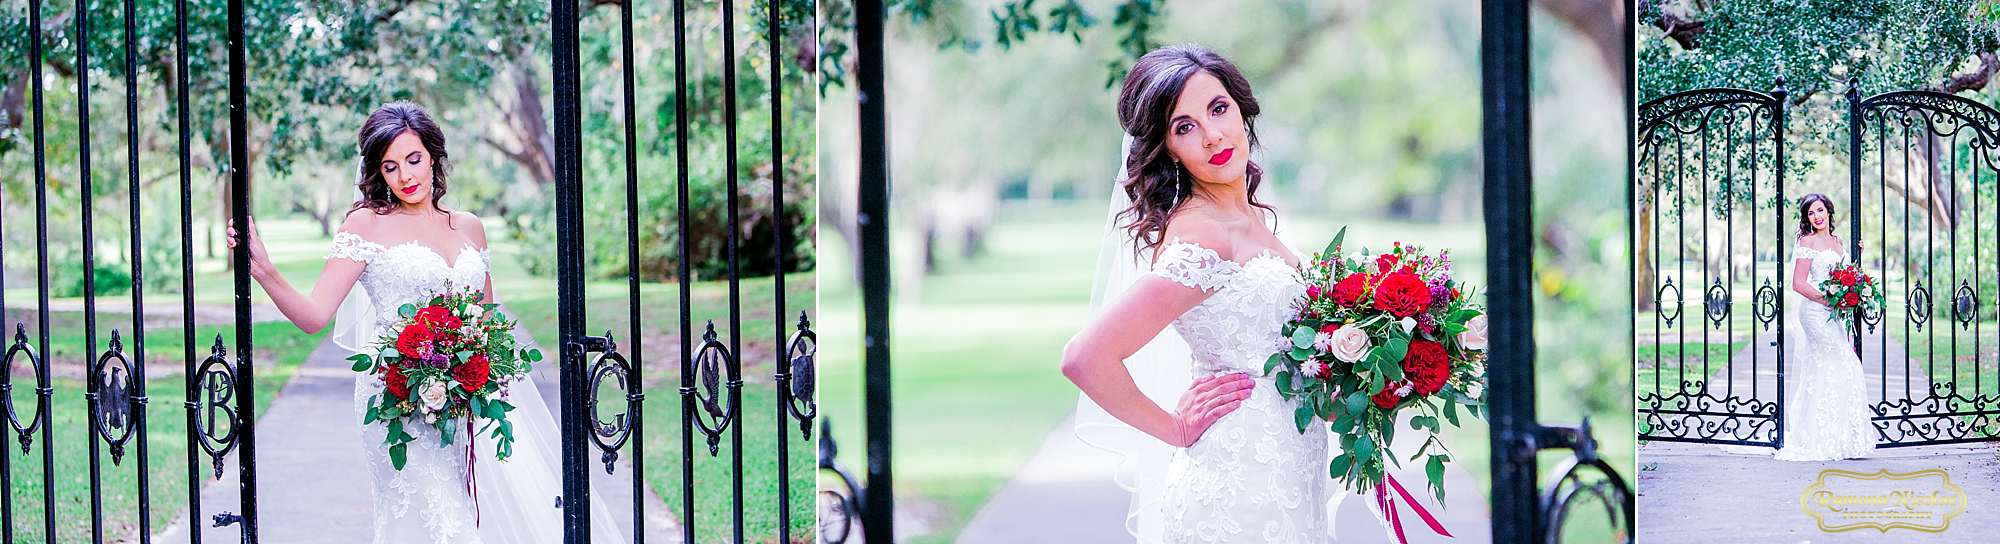 bride with red flowers by the black B & G gates at Brookgreen Gardens looking gorgeous during bridal session with ramona nicolae photography-9.jpg